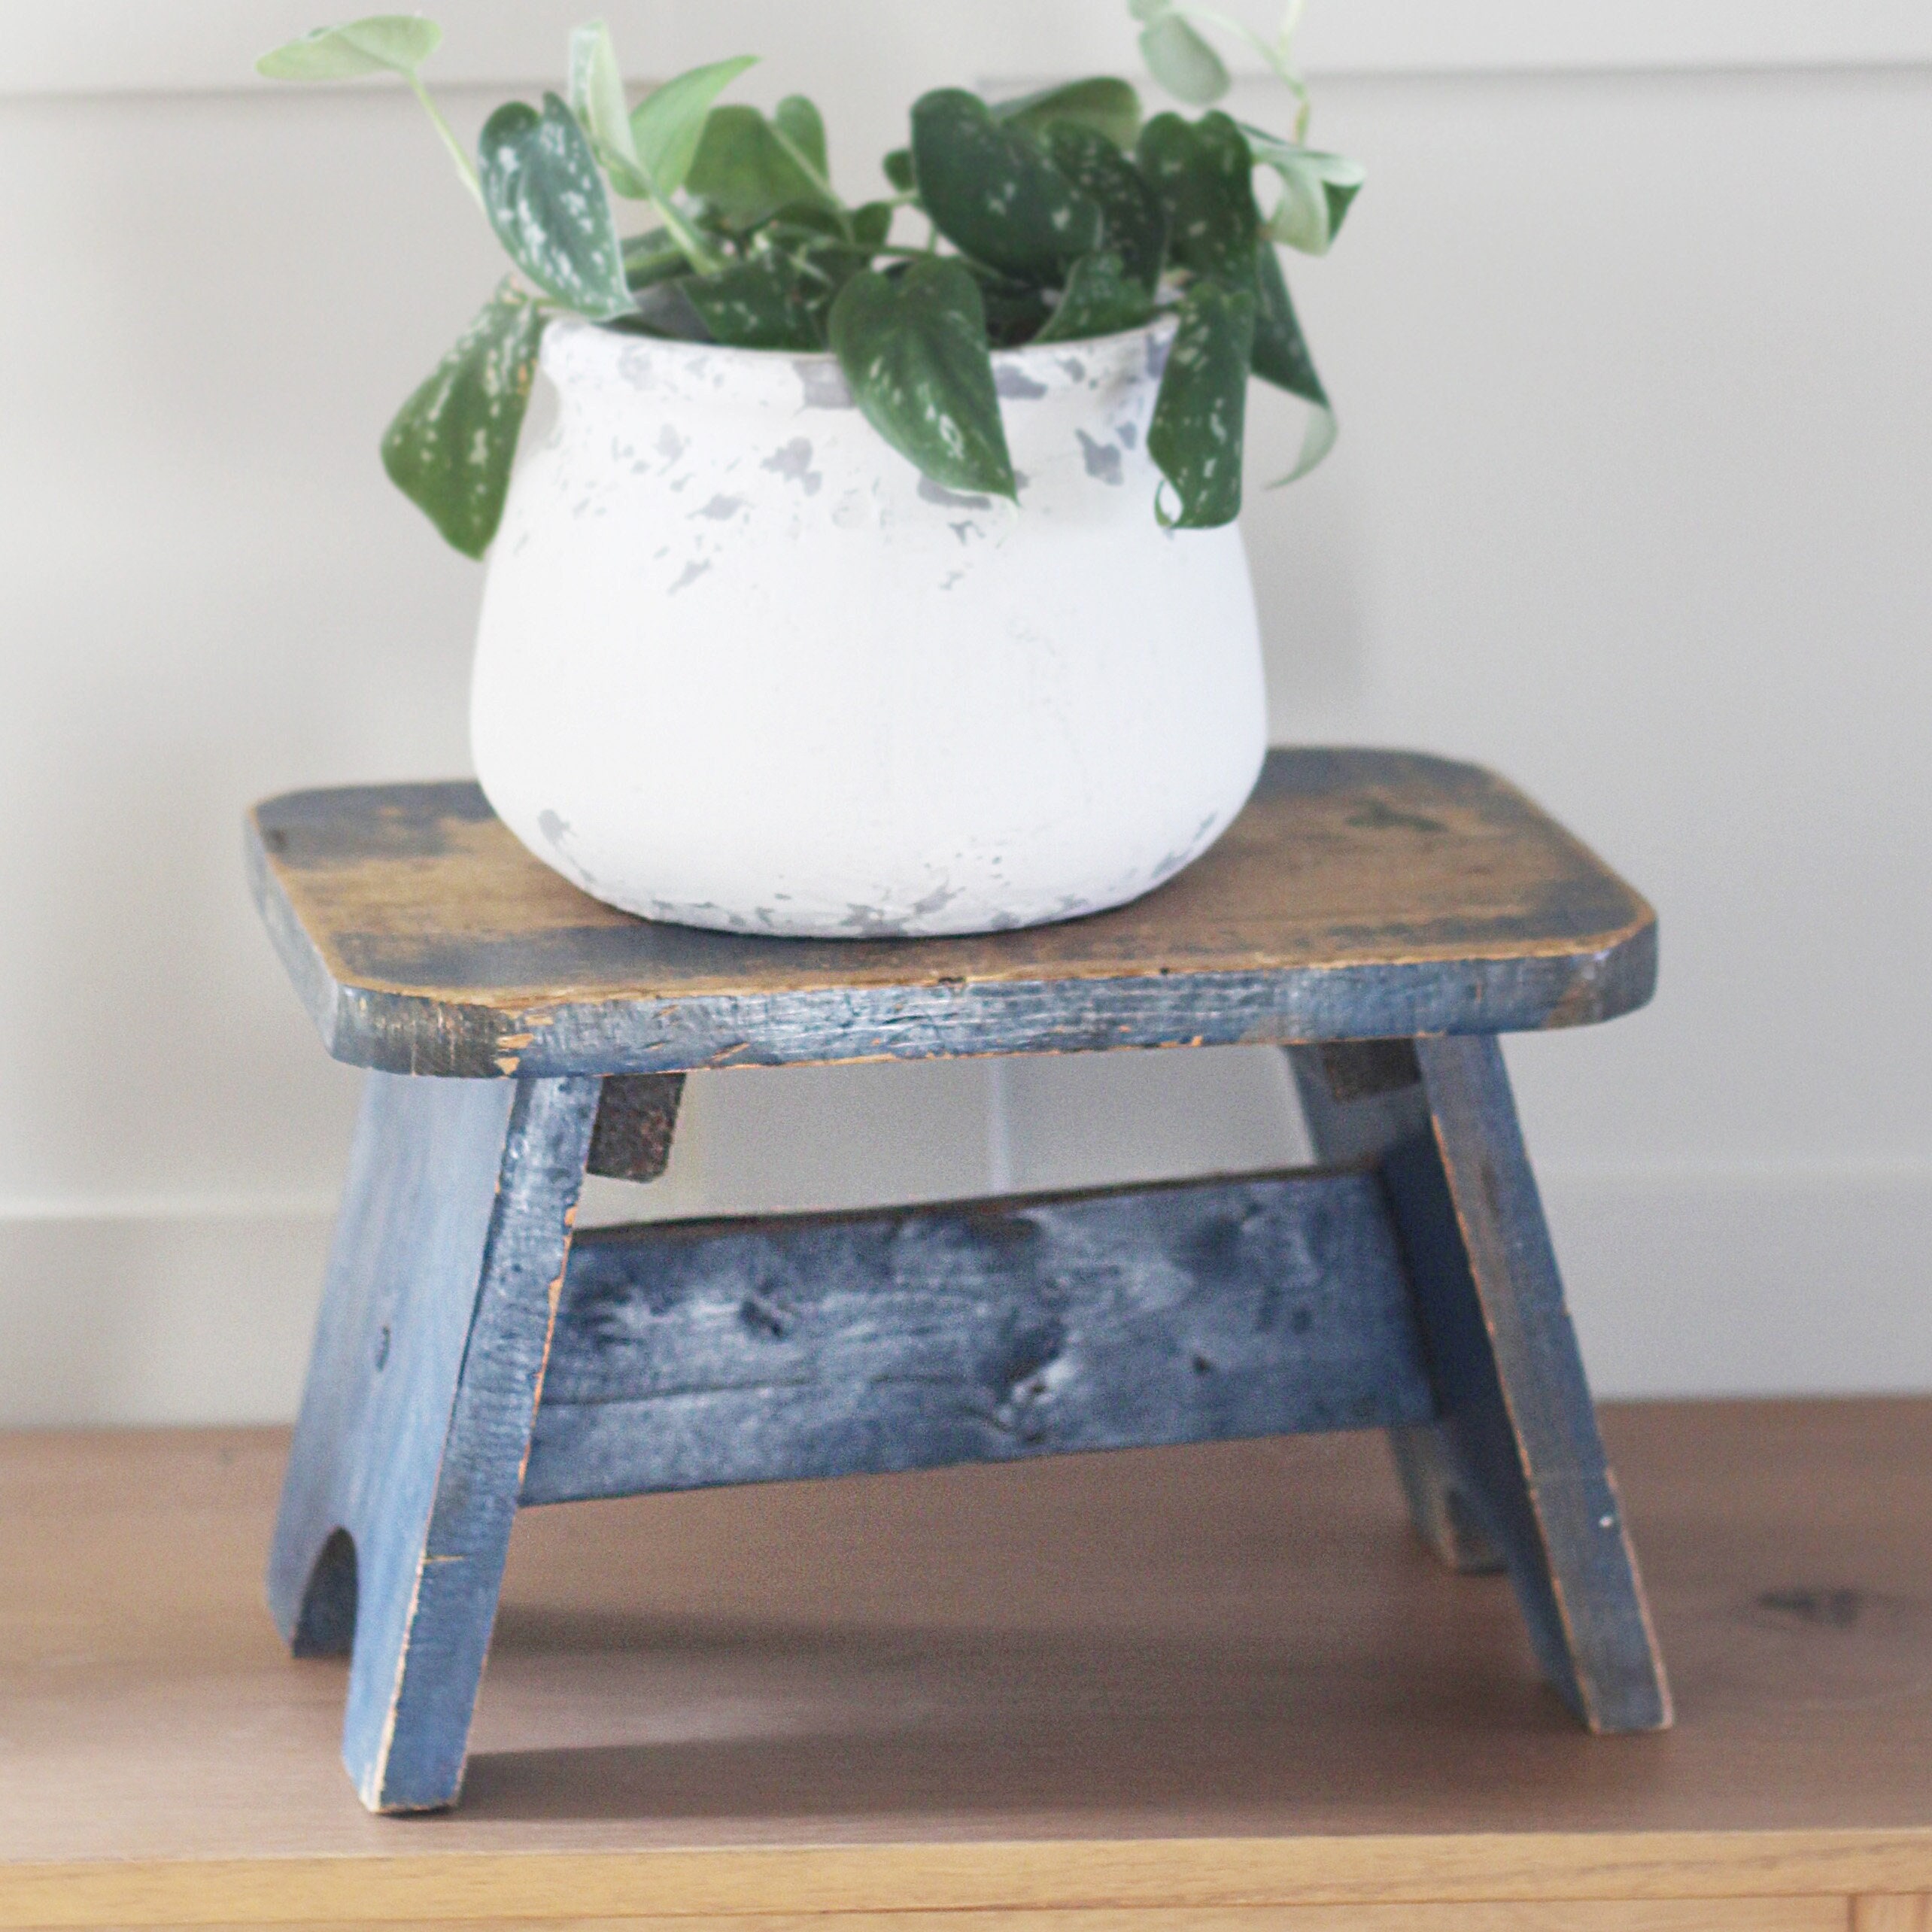 How to Shabby Chic Furniture - The Simple Guide to Shabby Chic Style